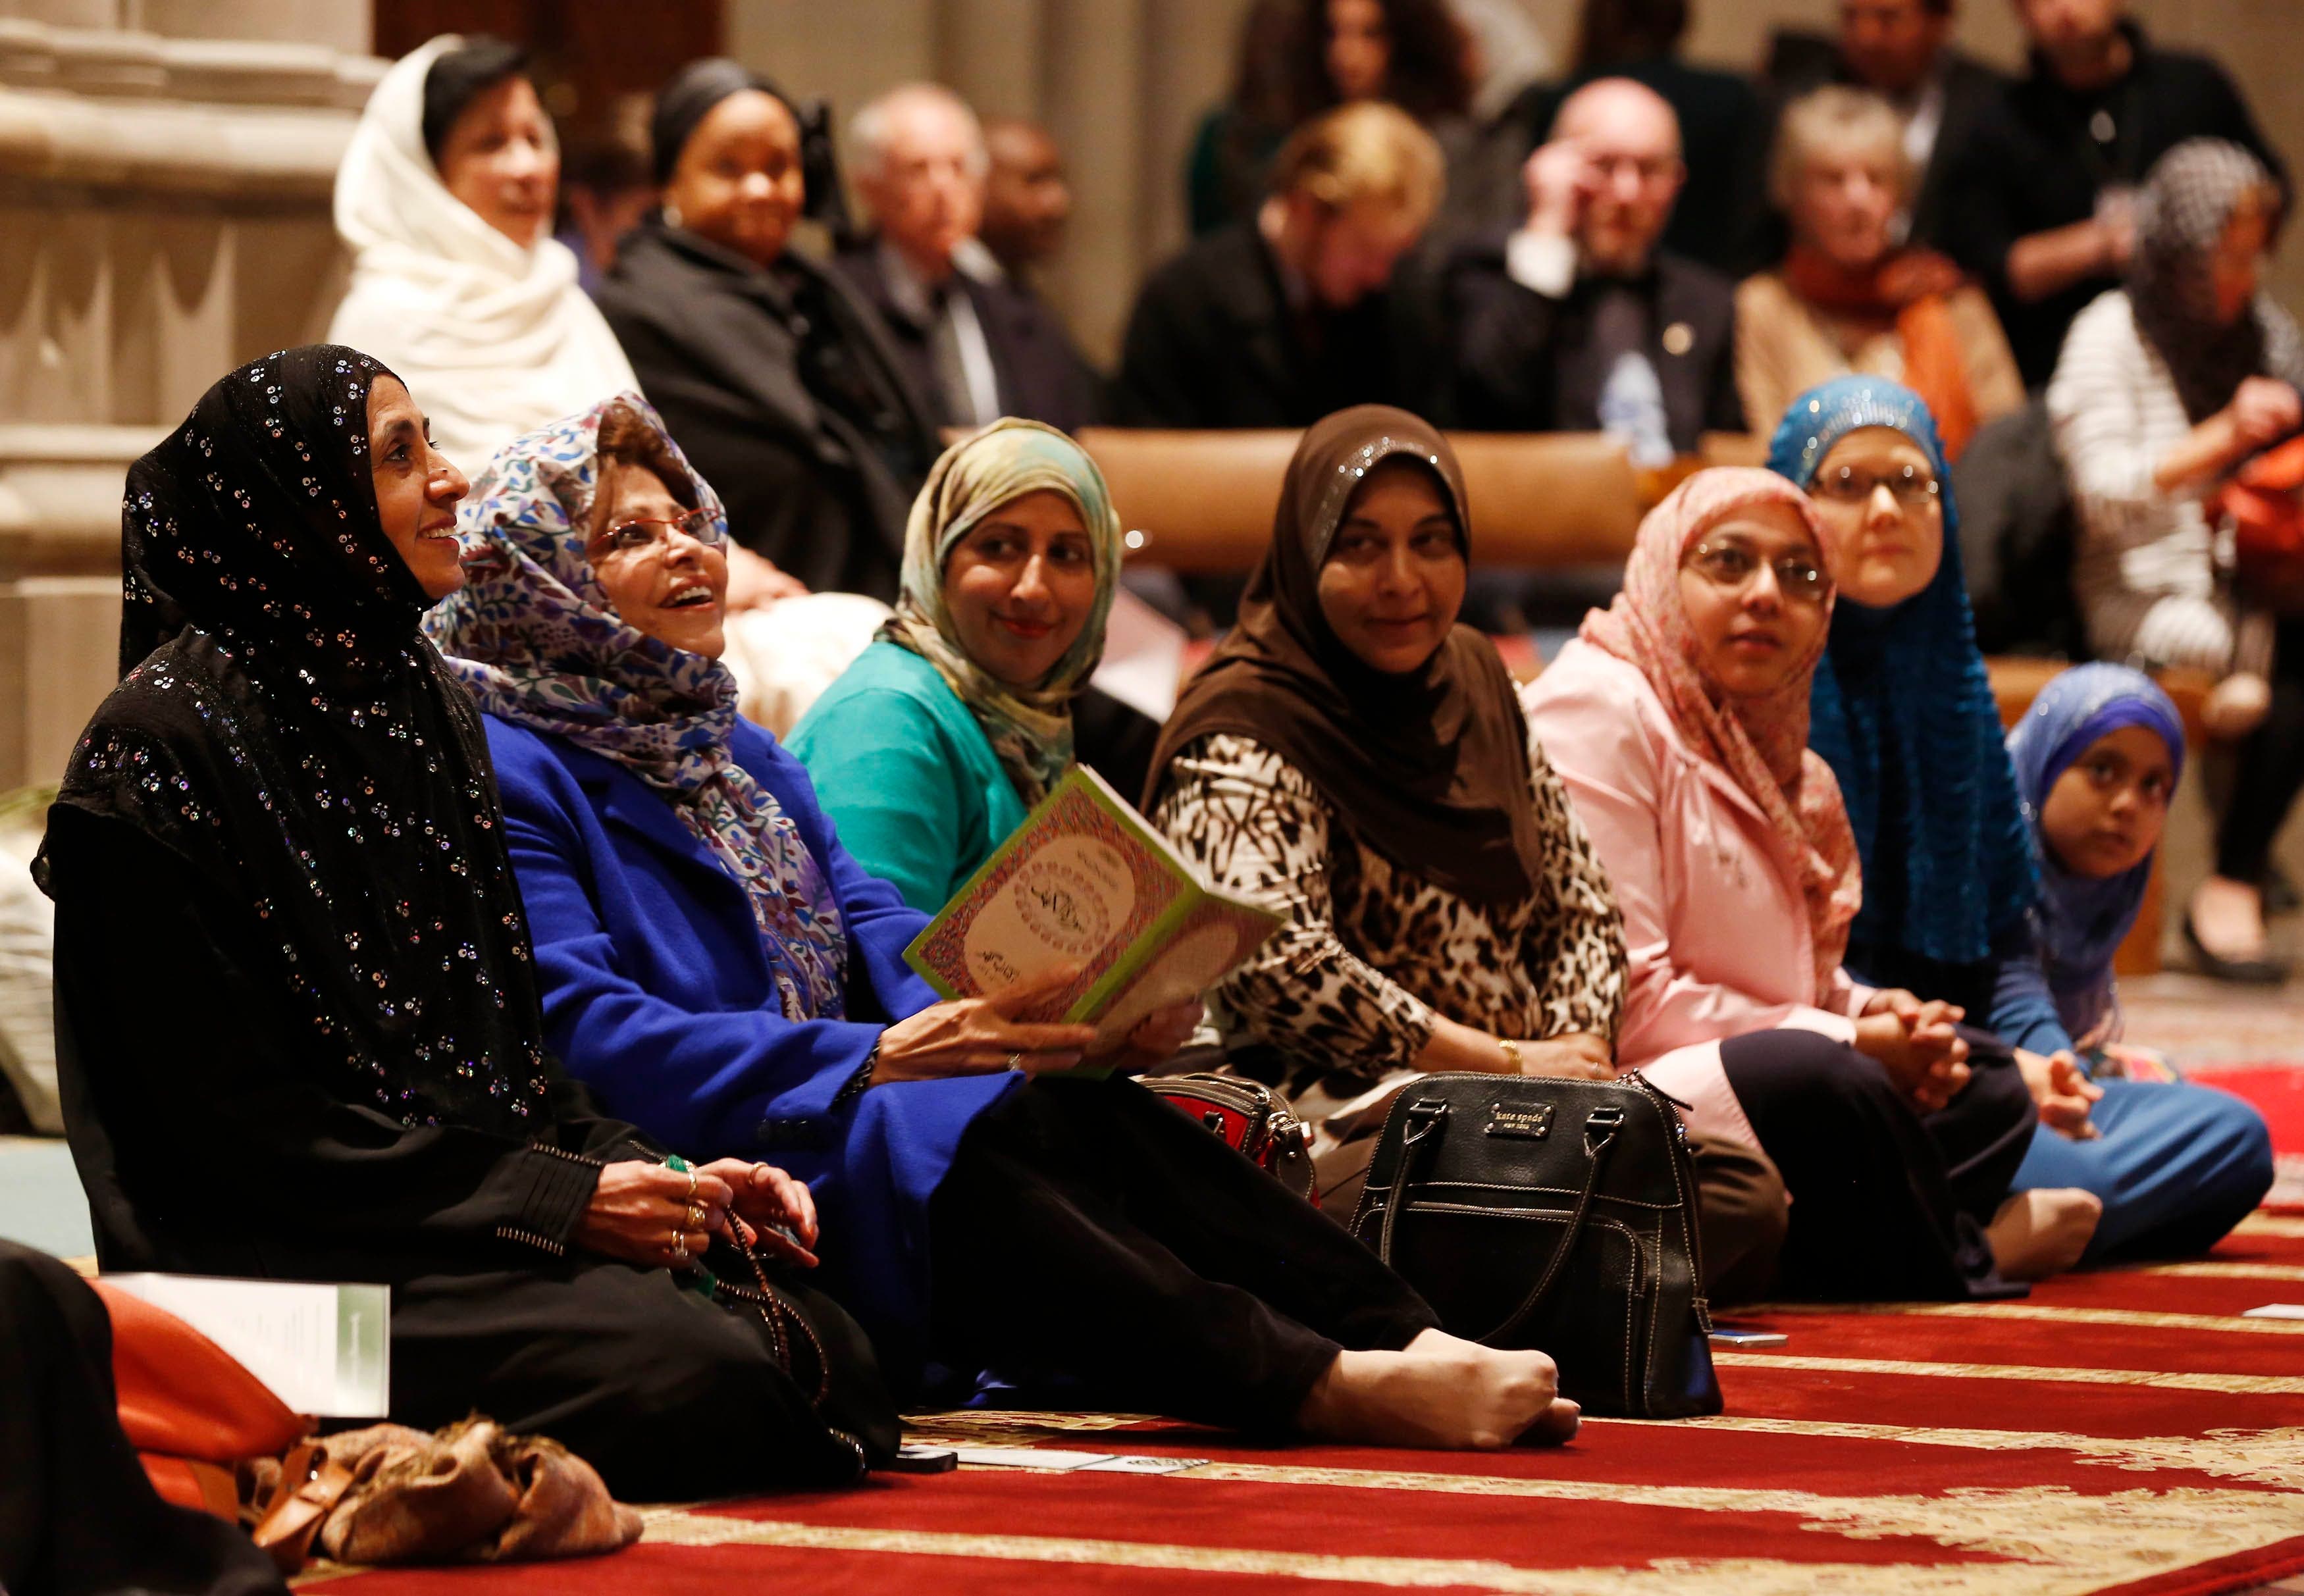 Women talk as the Washington National Cathedral and five Muslim groups hold the first celebration of Muslim Friday Prayers, Jumaa, in the Cathedral's North Transept in Washington, November 14, 2014. (Reuters)